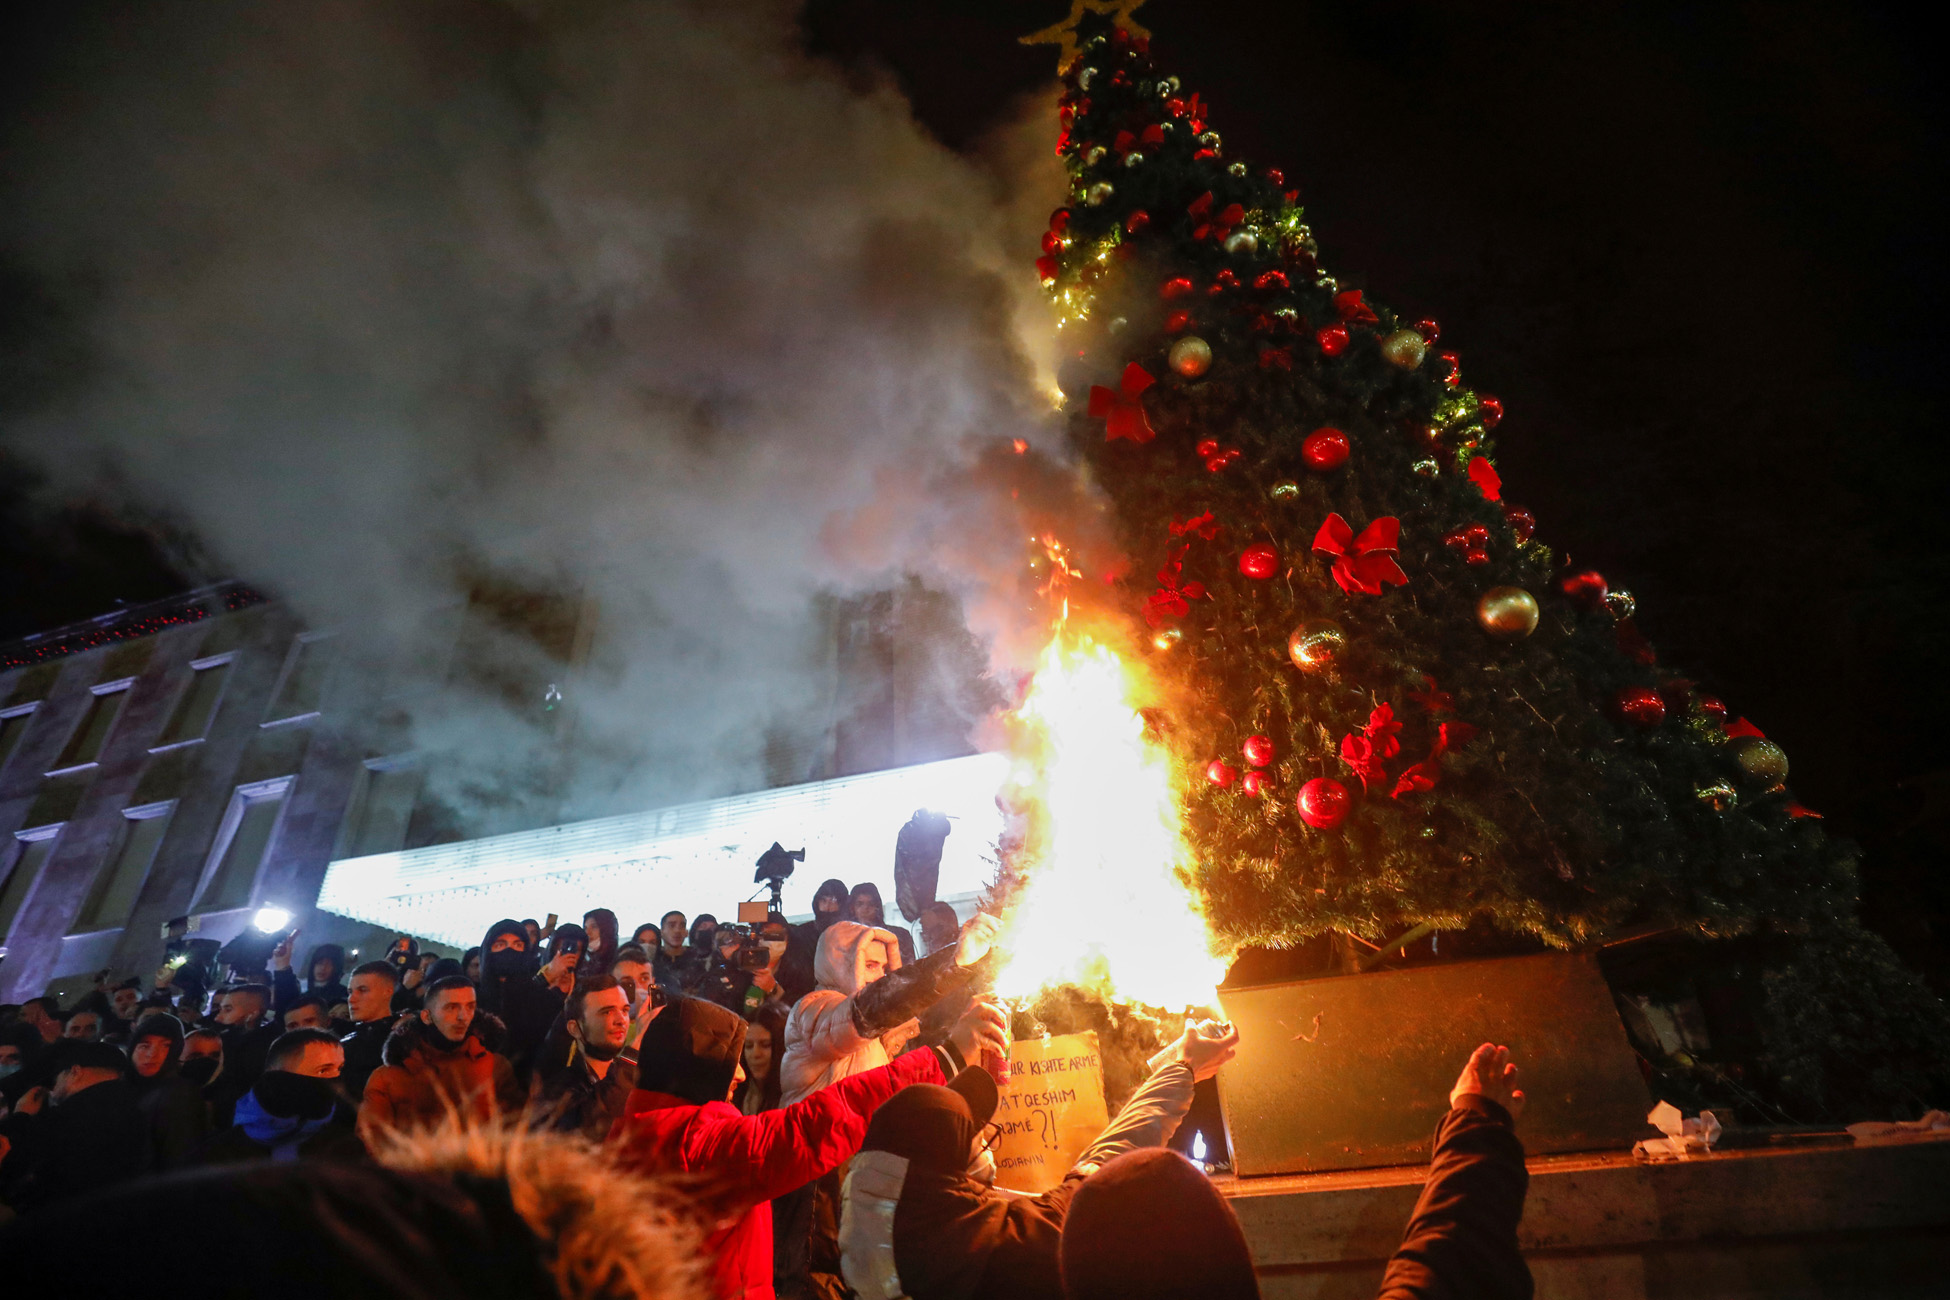 Demonstrators set fire to a Christmas tree in front of the prime minister's office during a protest in reaction to the death of Klodian Rasha, after he was shot dead during the country's overnight curfew, in Tirana, Albania, December 9, 2020. REUTERS/Florion Goga